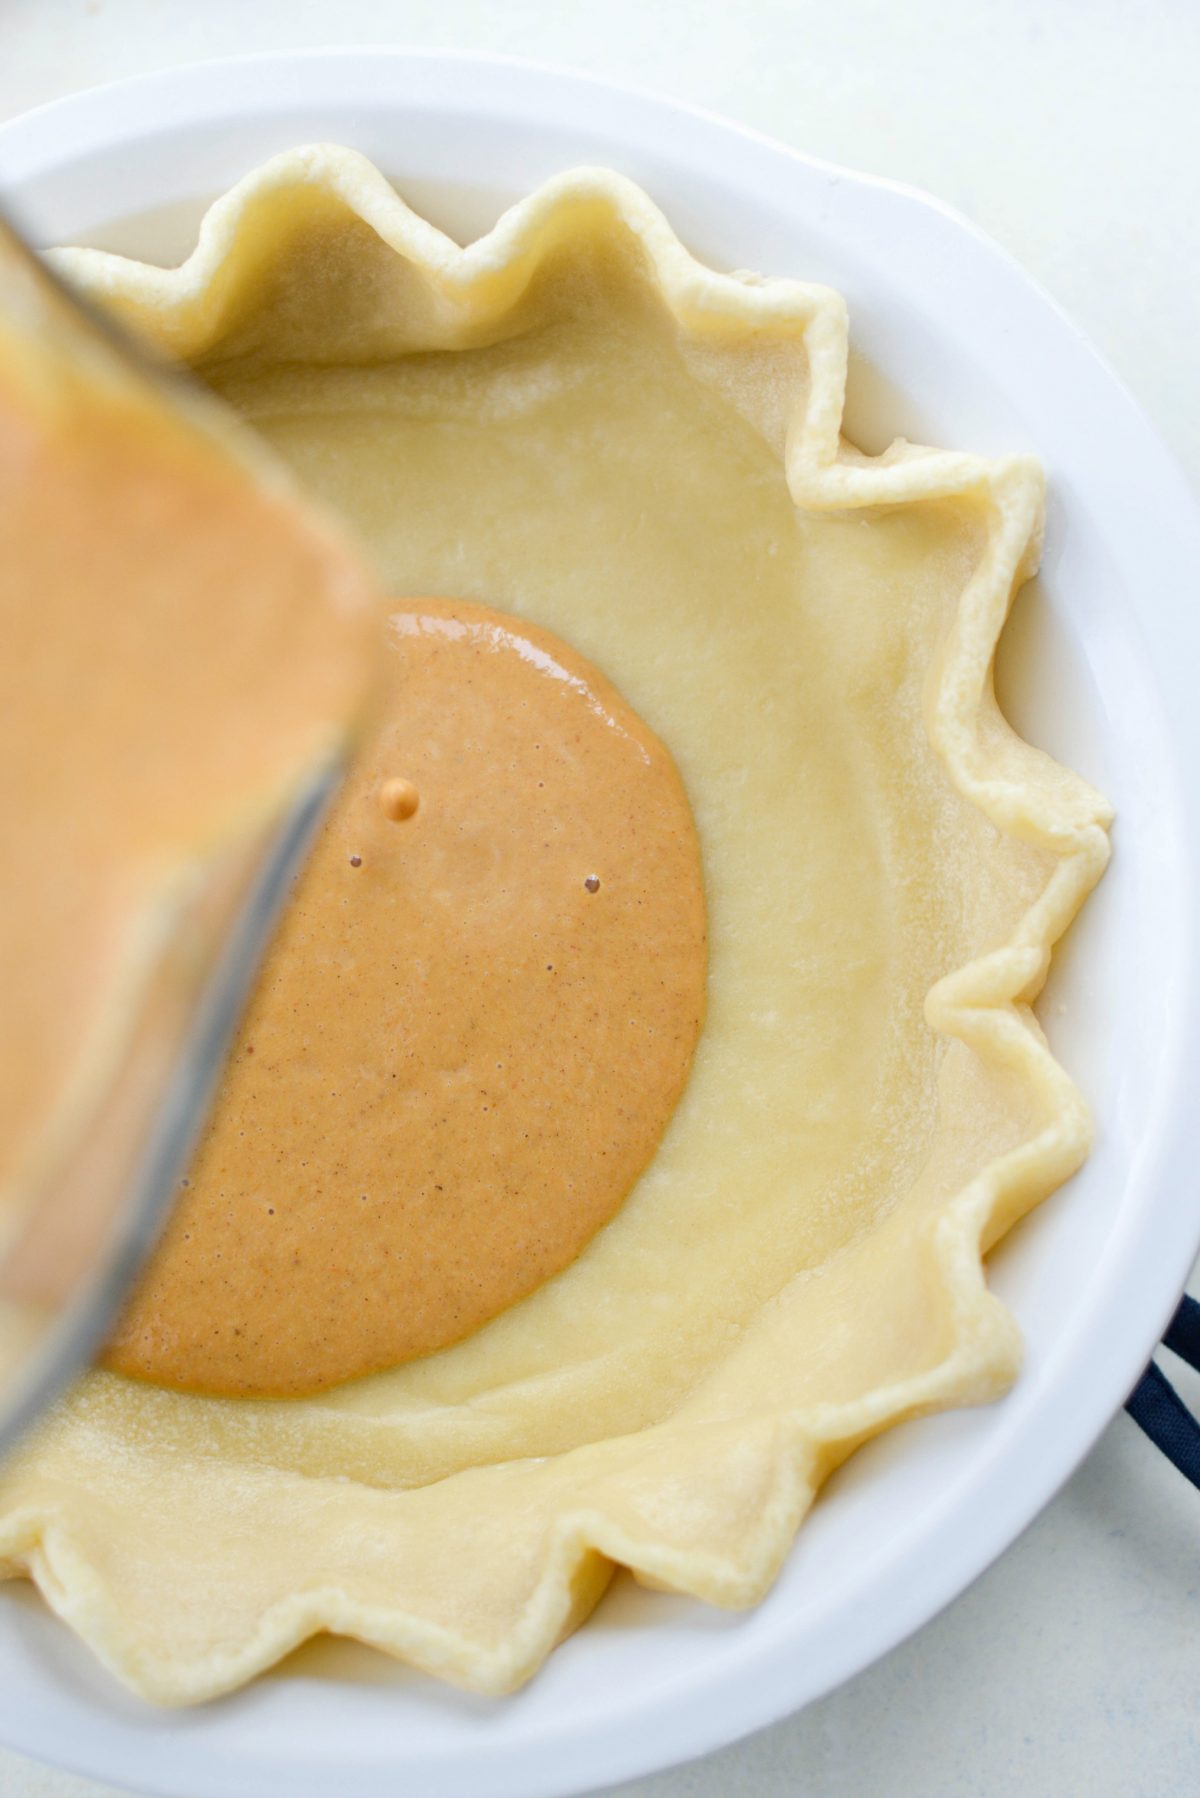 pour into partially baked pie crust.